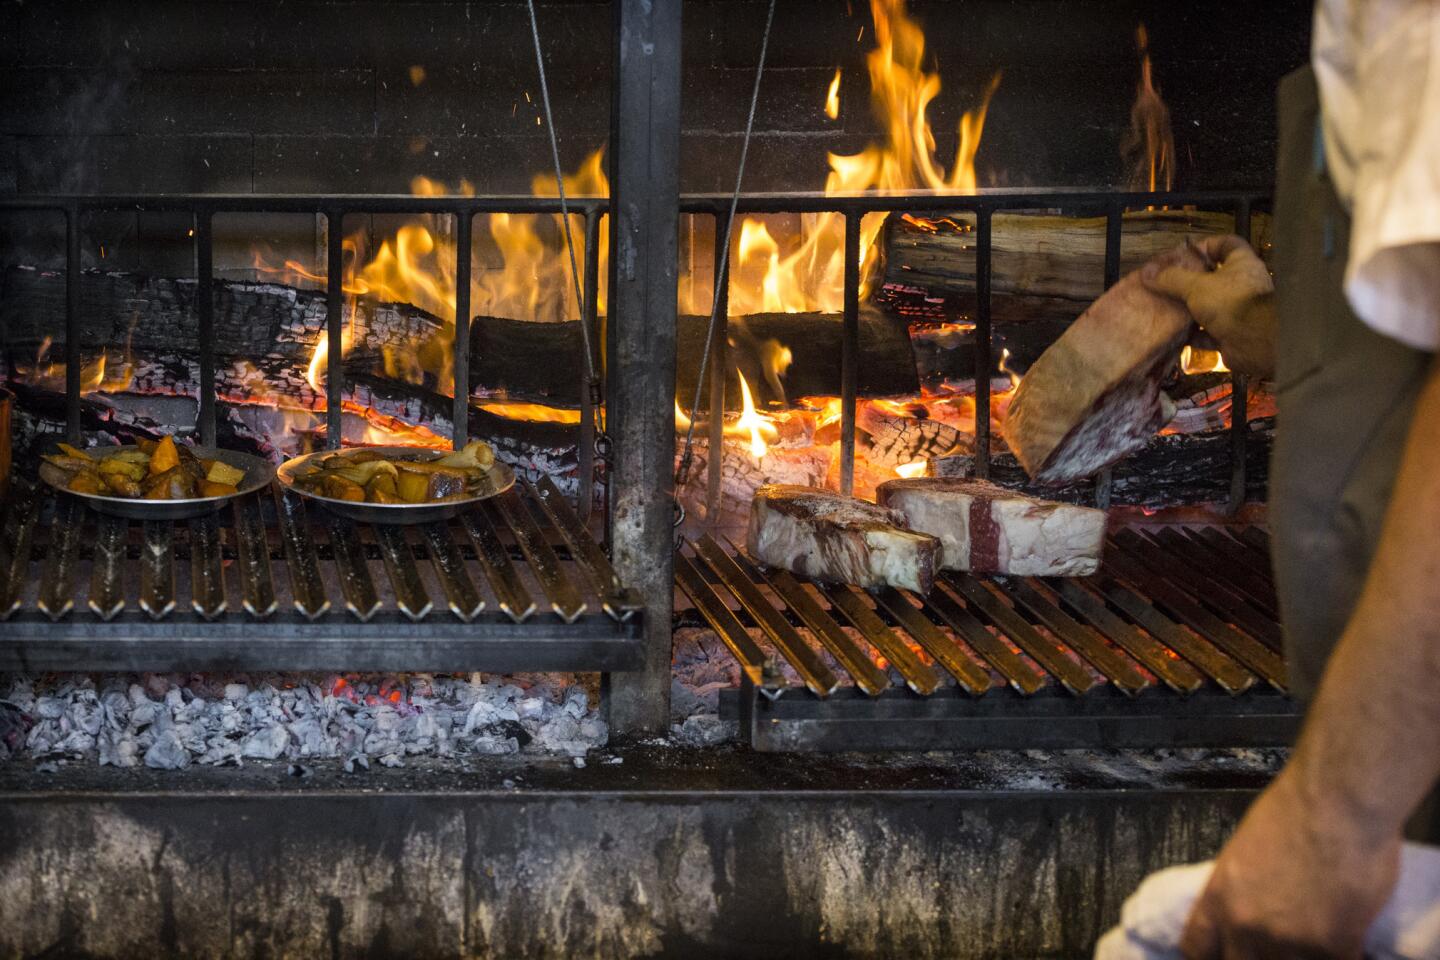 Vegetables and rib-eye steaks are cooked over the coals at Rossoblu.